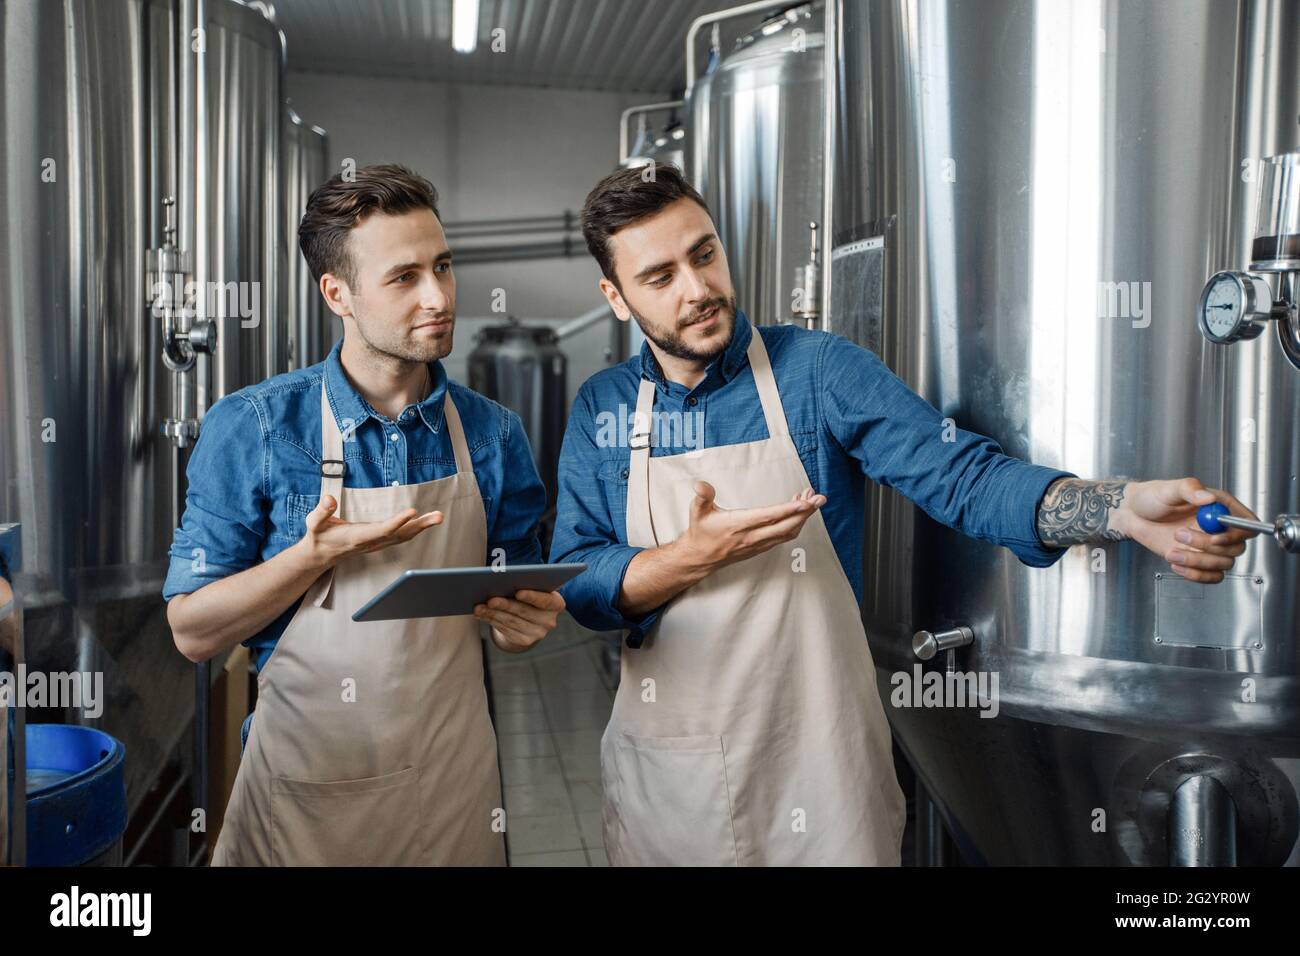 Plant management, modern technology and work at brewery Stock Photo